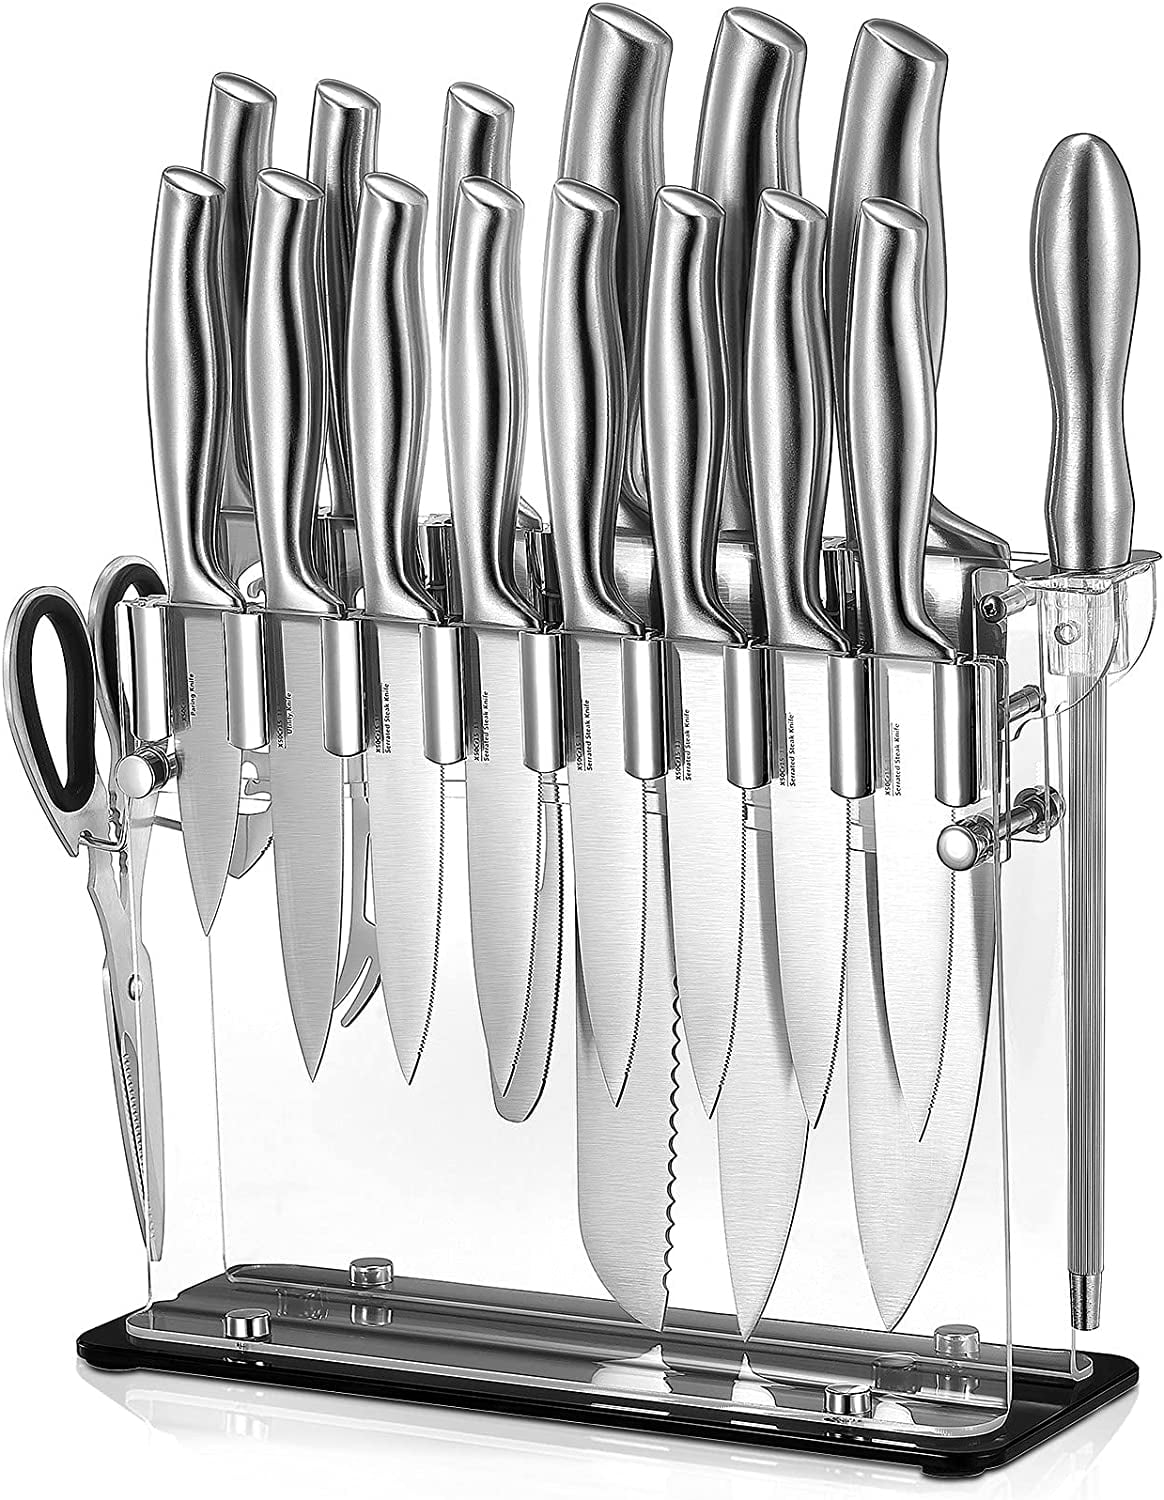 Aiheal Knife Set 14PCS and Serrated Steak Knife Set of 8, Stainless Steel  Kitchen Knife Set with Clear Knife Block and Gift Box, No Rust and Super